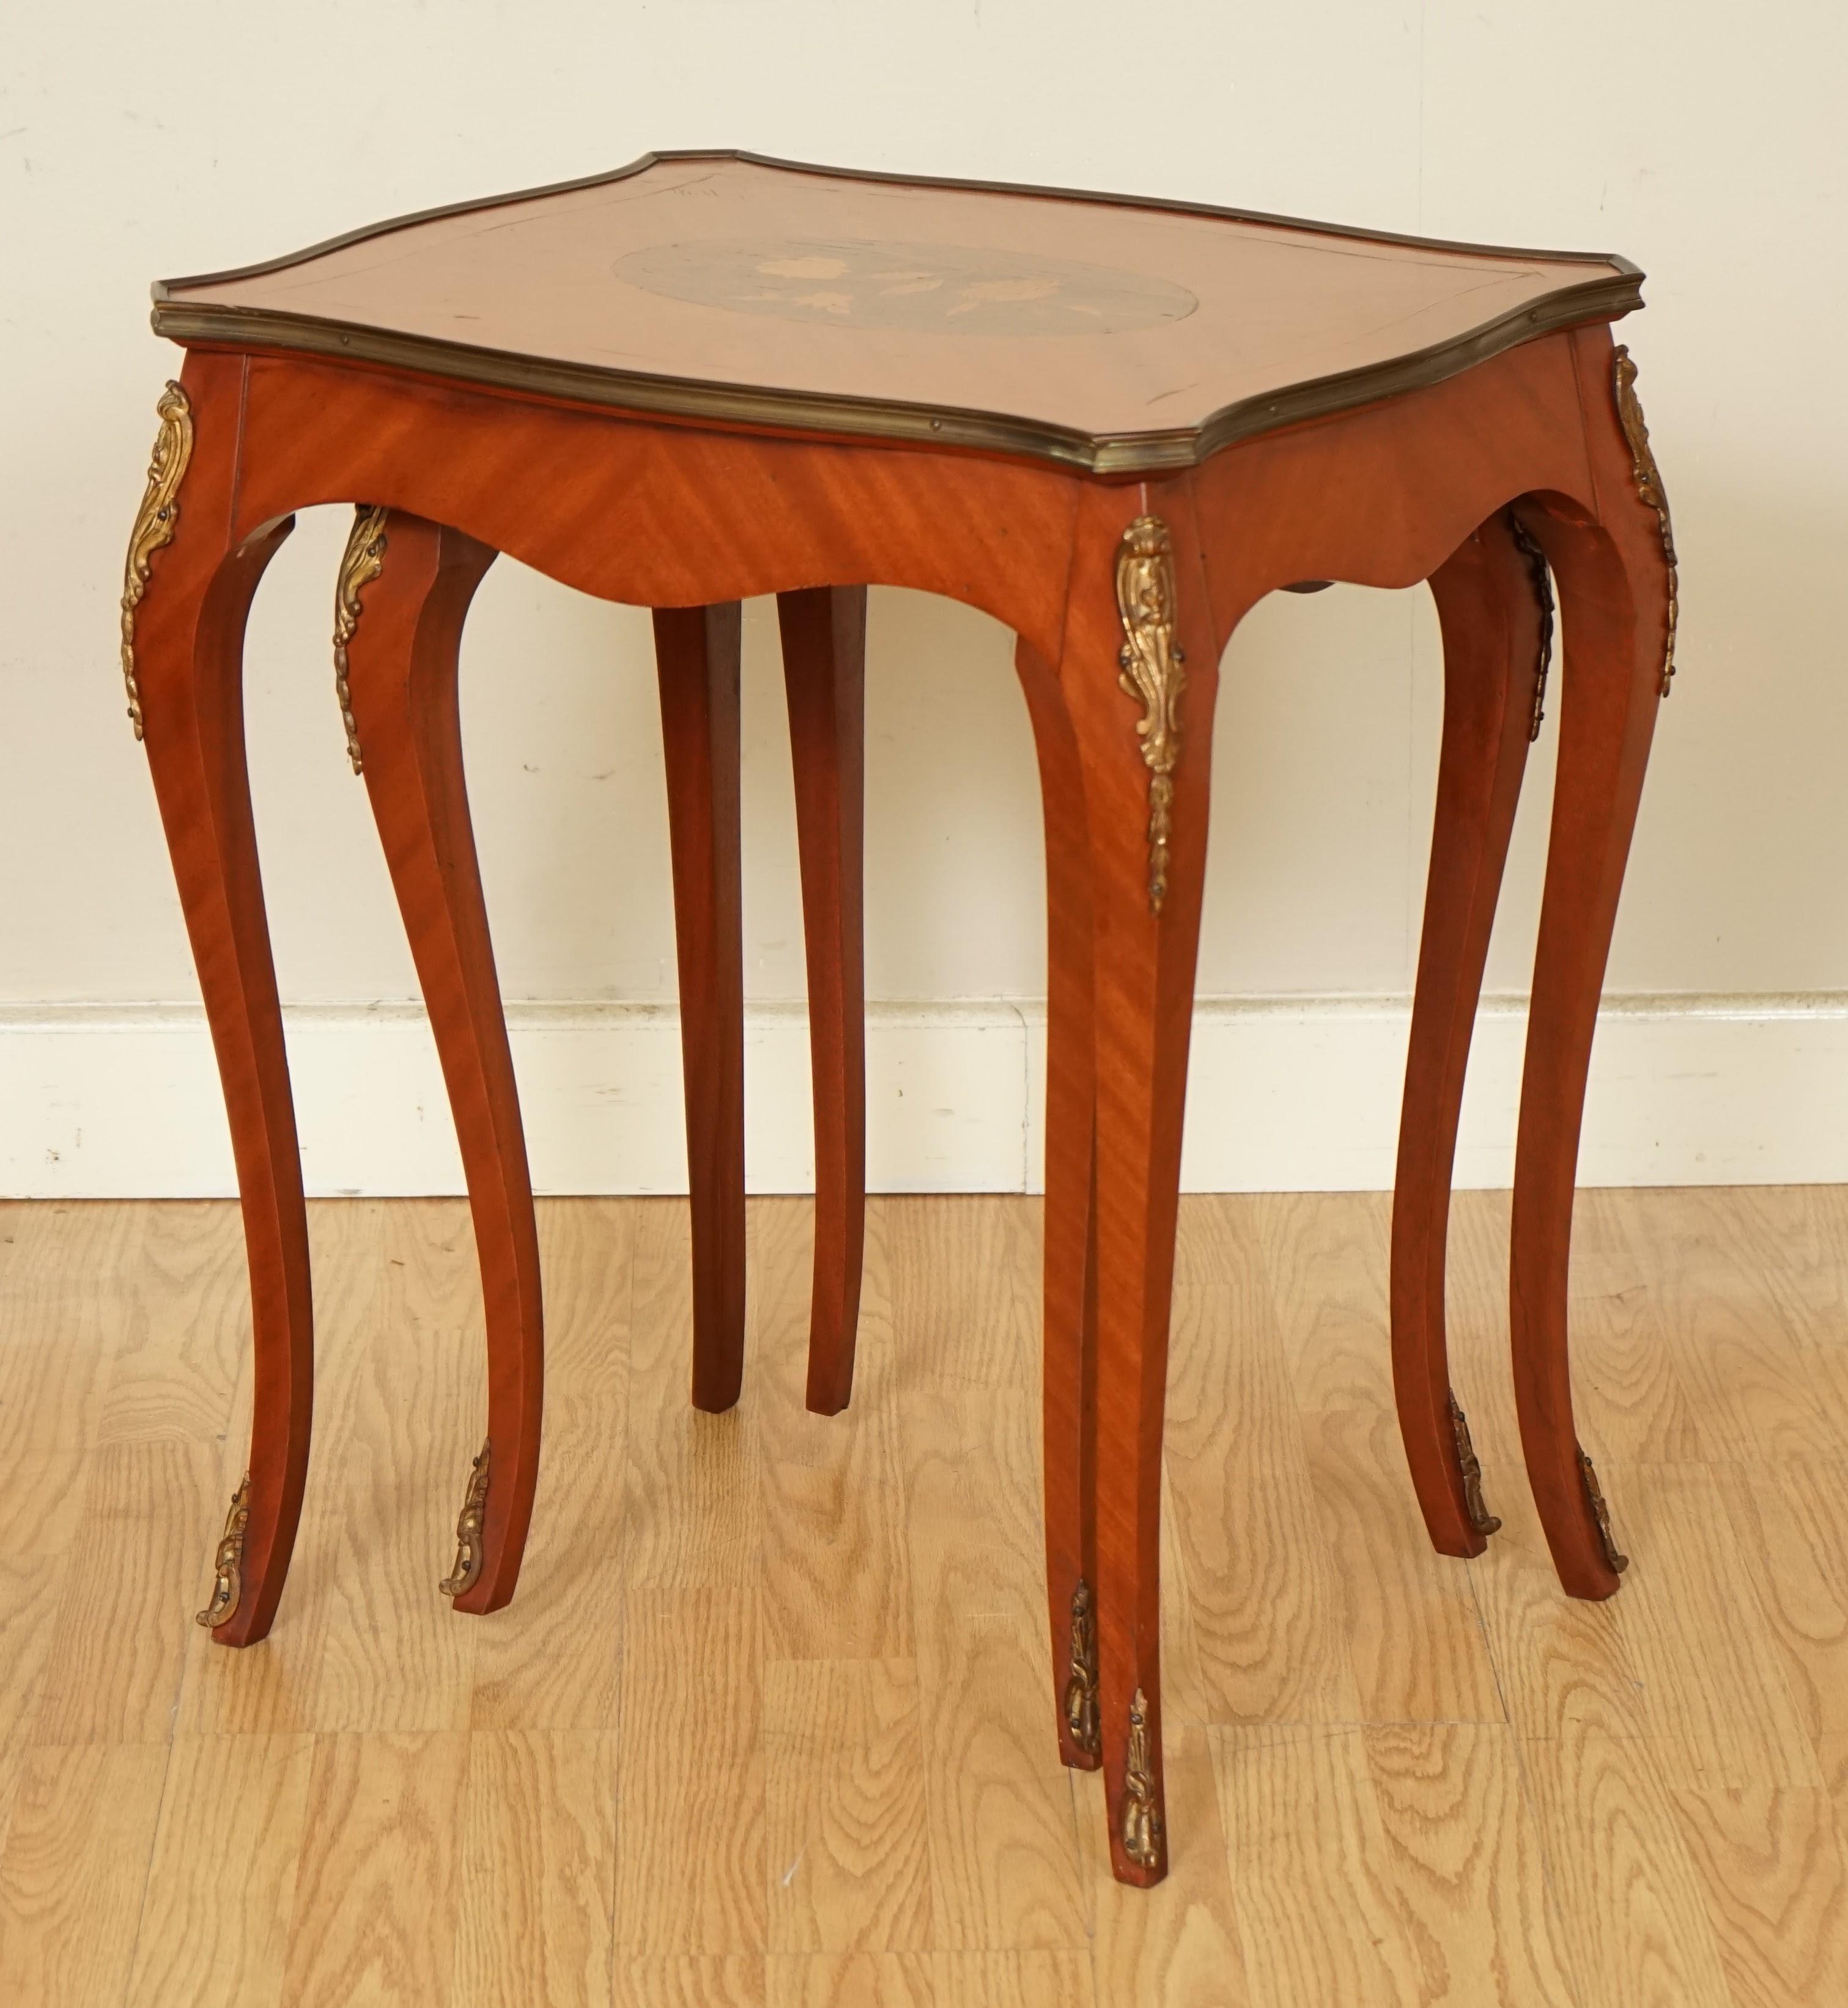 Lovely Vintage French Inlaid Parquetry Set of 2 Nesting Tables For Sale 2